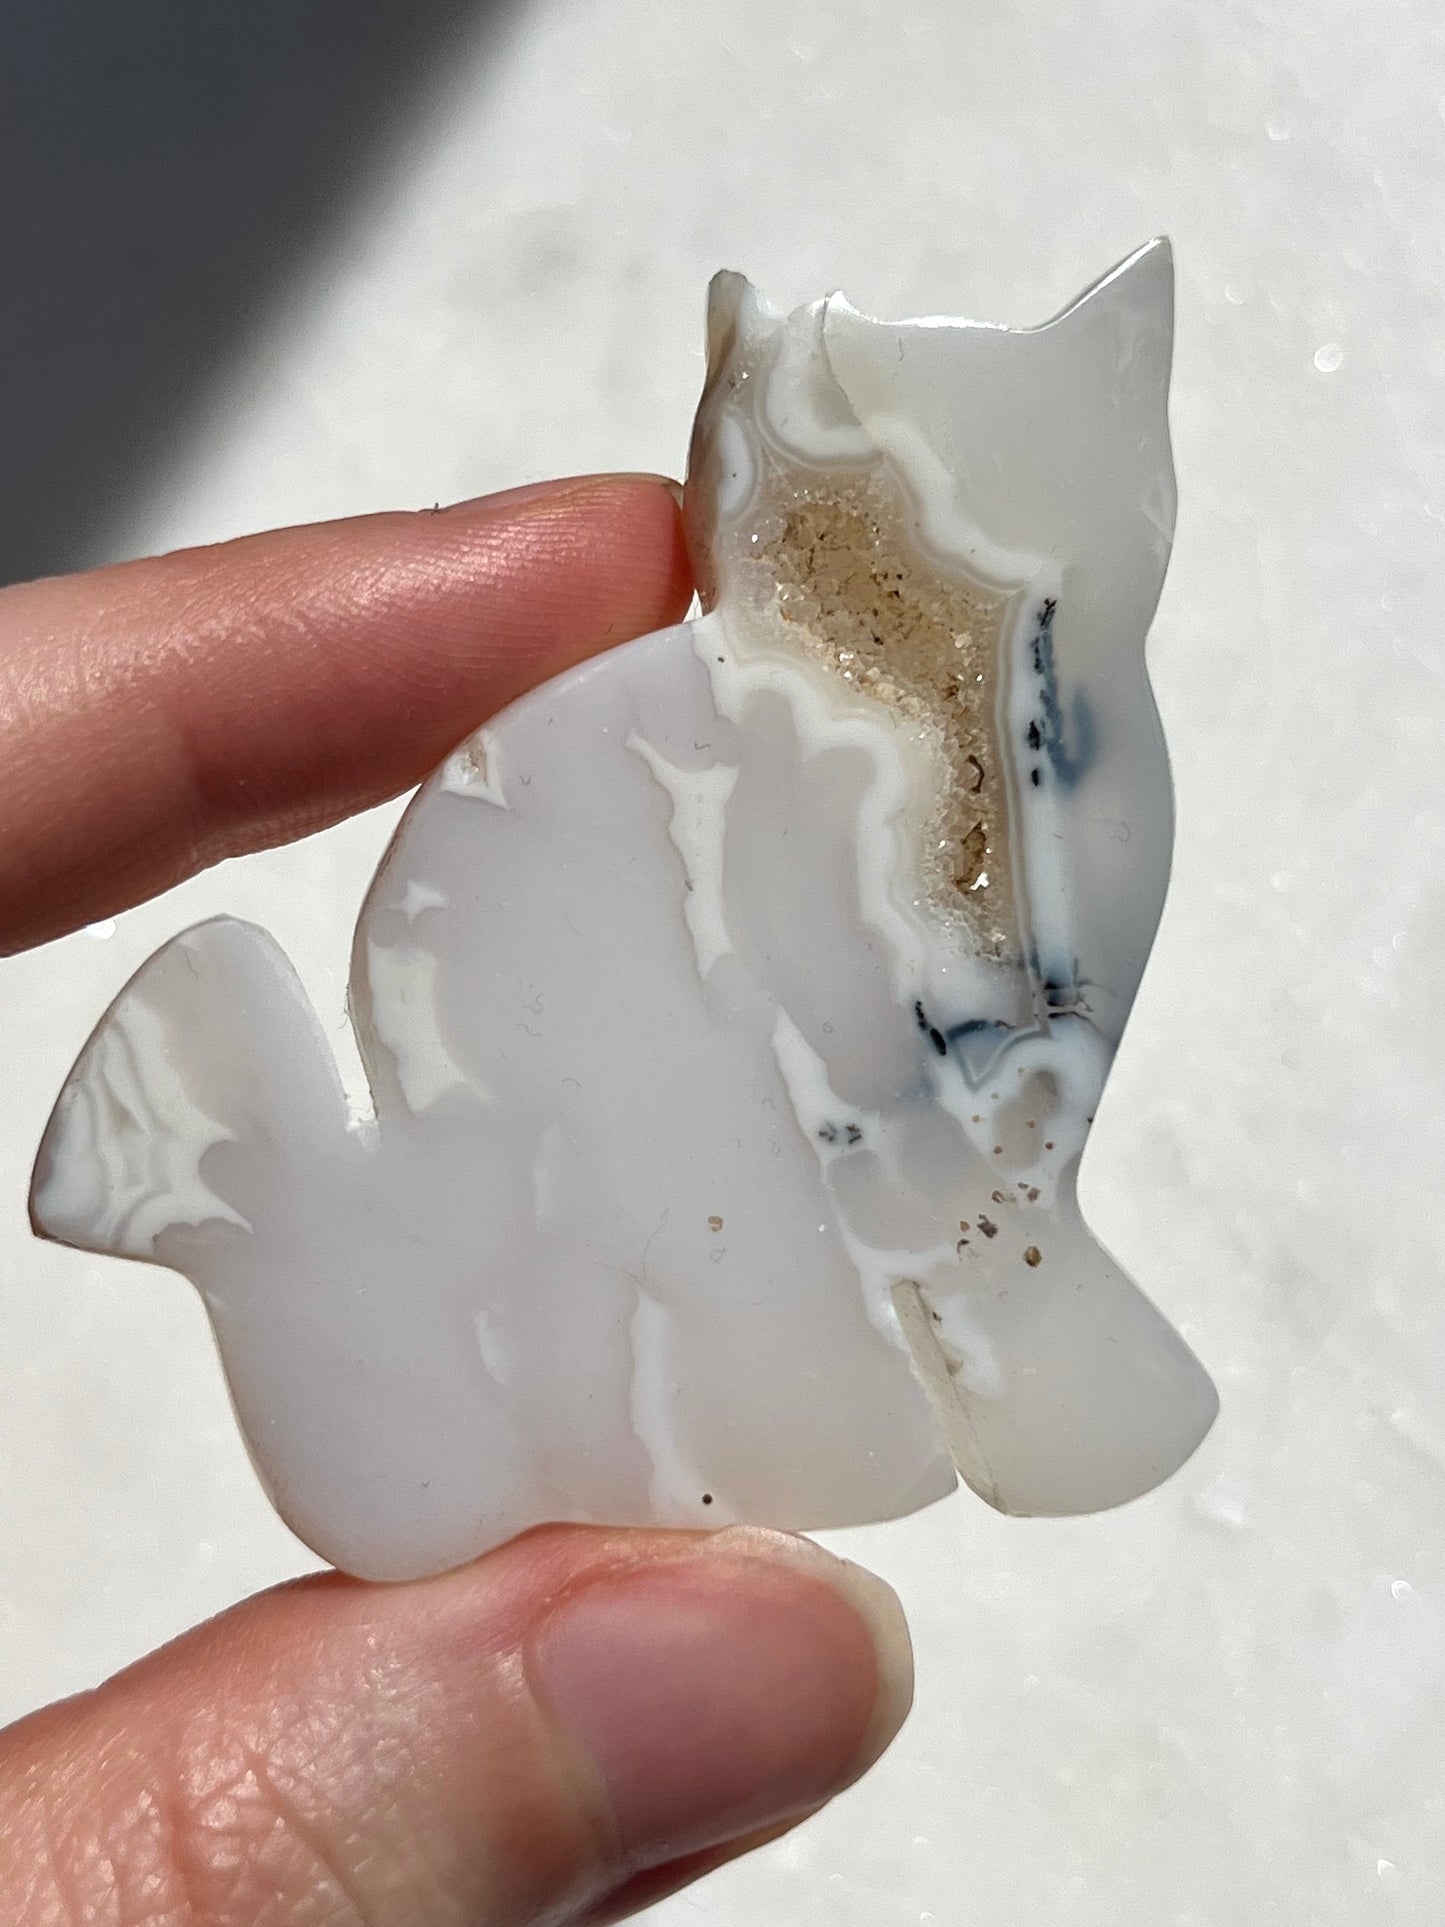 Druzy White Plume Agate w/Dendritic Inclusions Cat Carving #3 (Slight Chip on Right Ear)